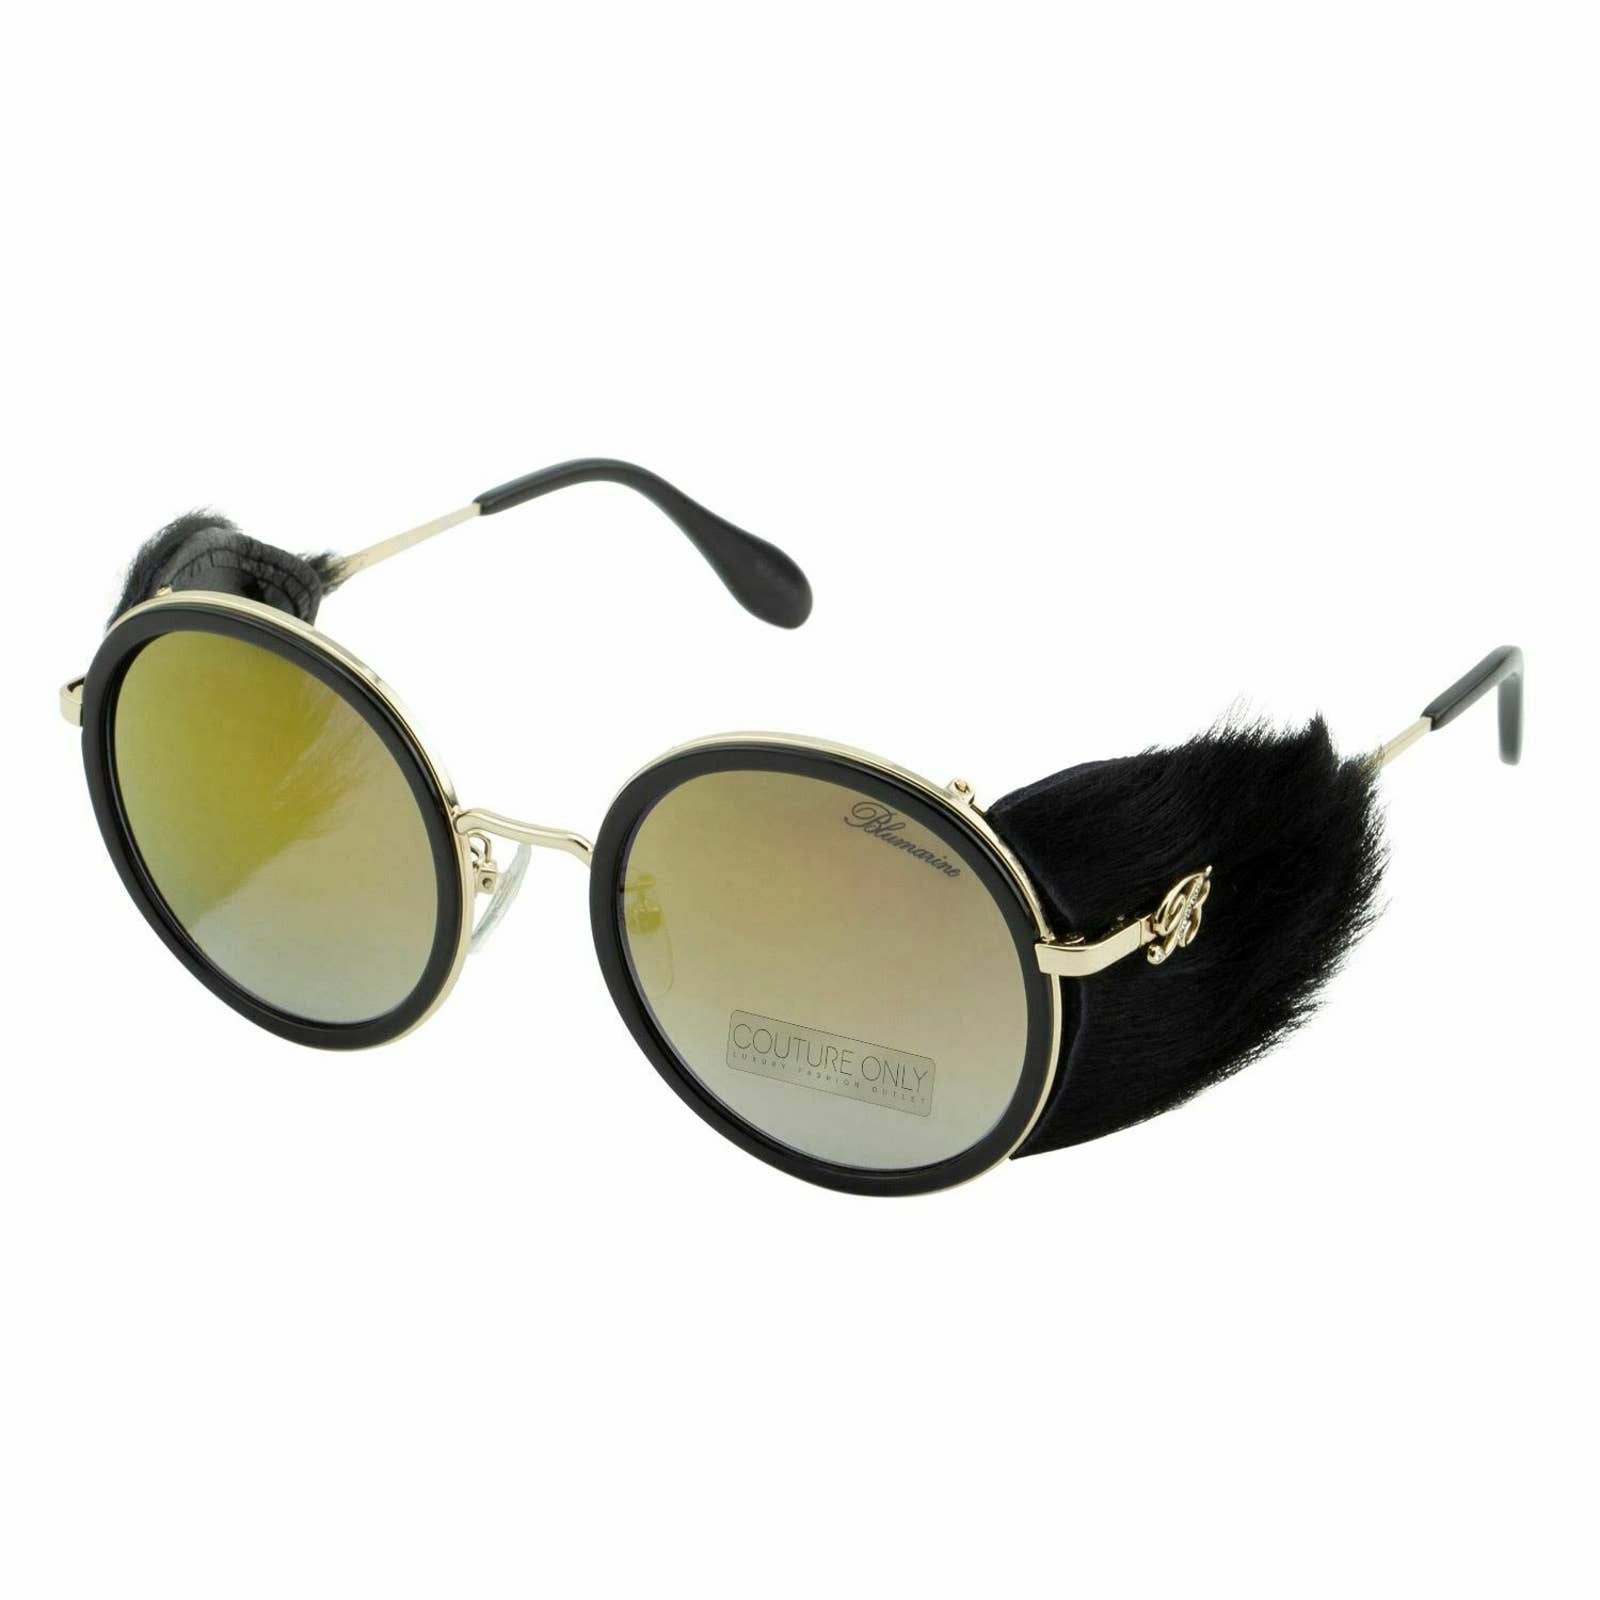 Limited Edition Women Gold Round Sunglasses